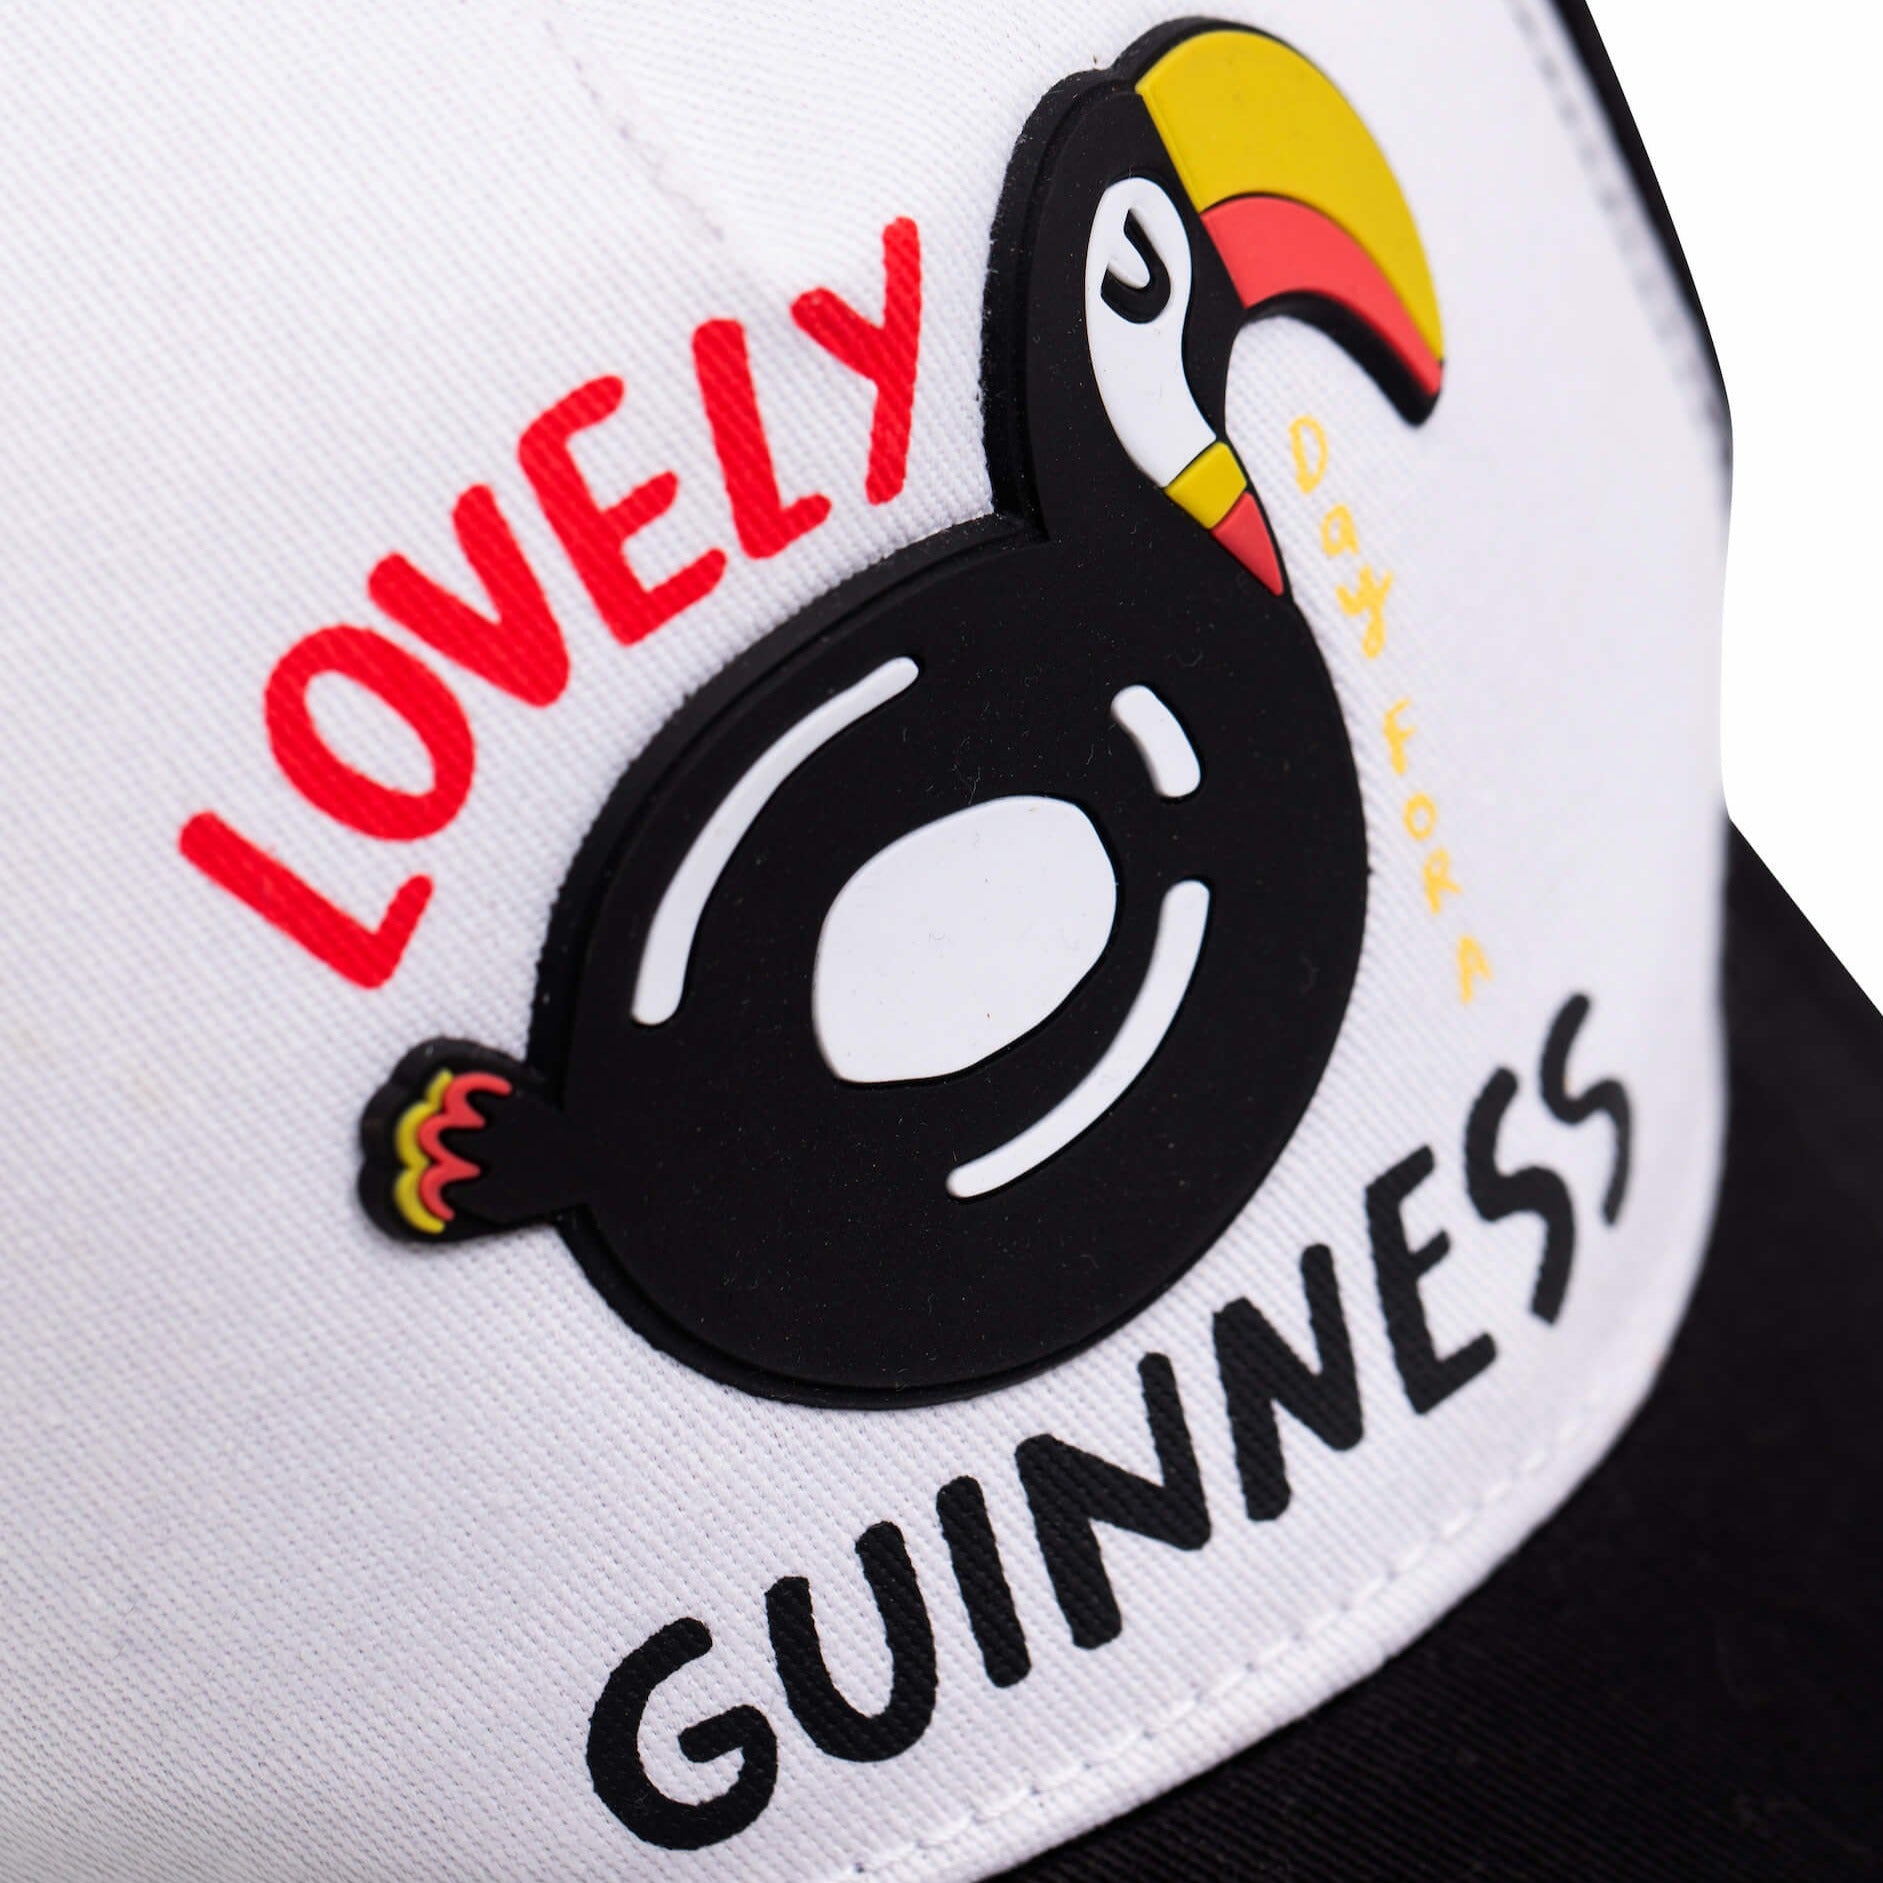 Detail of the Lovely Day Black and White Toucan cap by Guinness and Kathi Burke.